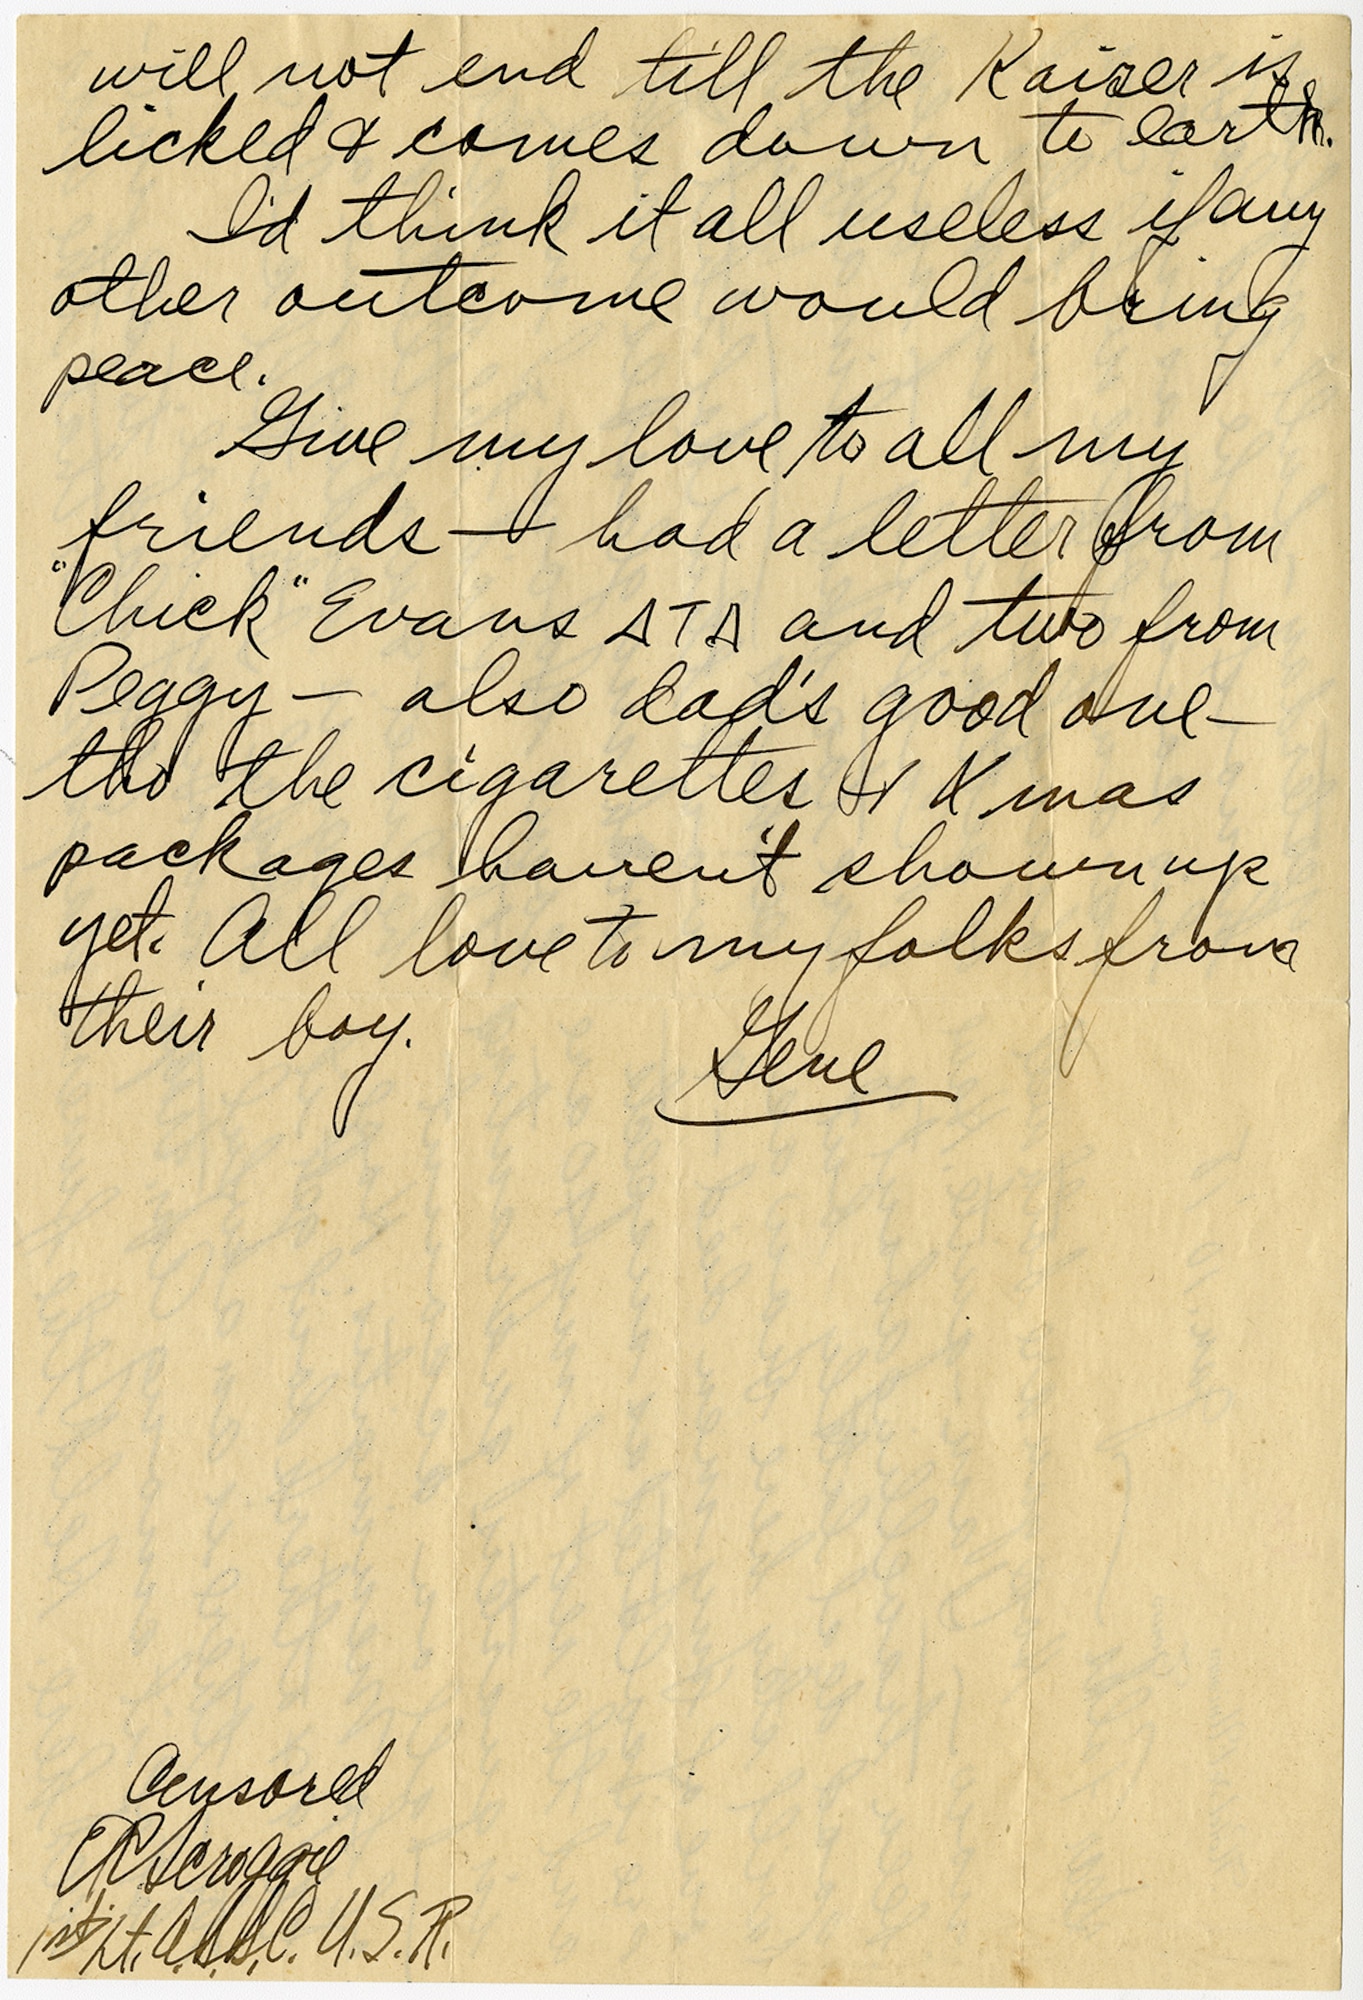 Lt. Eugene Scroggie’s poignant letter home illustrates the dangers faced by American soldiers in France and the lack of even simple necessities. Disease posed an ever-present threat to American troops even in areas of relative safety, far away from the Front. This letter brilliantly emphasizes that those men who succumbed to illness died as heroes, same as their comrades who died in combat. (U.S. Air Force photo)